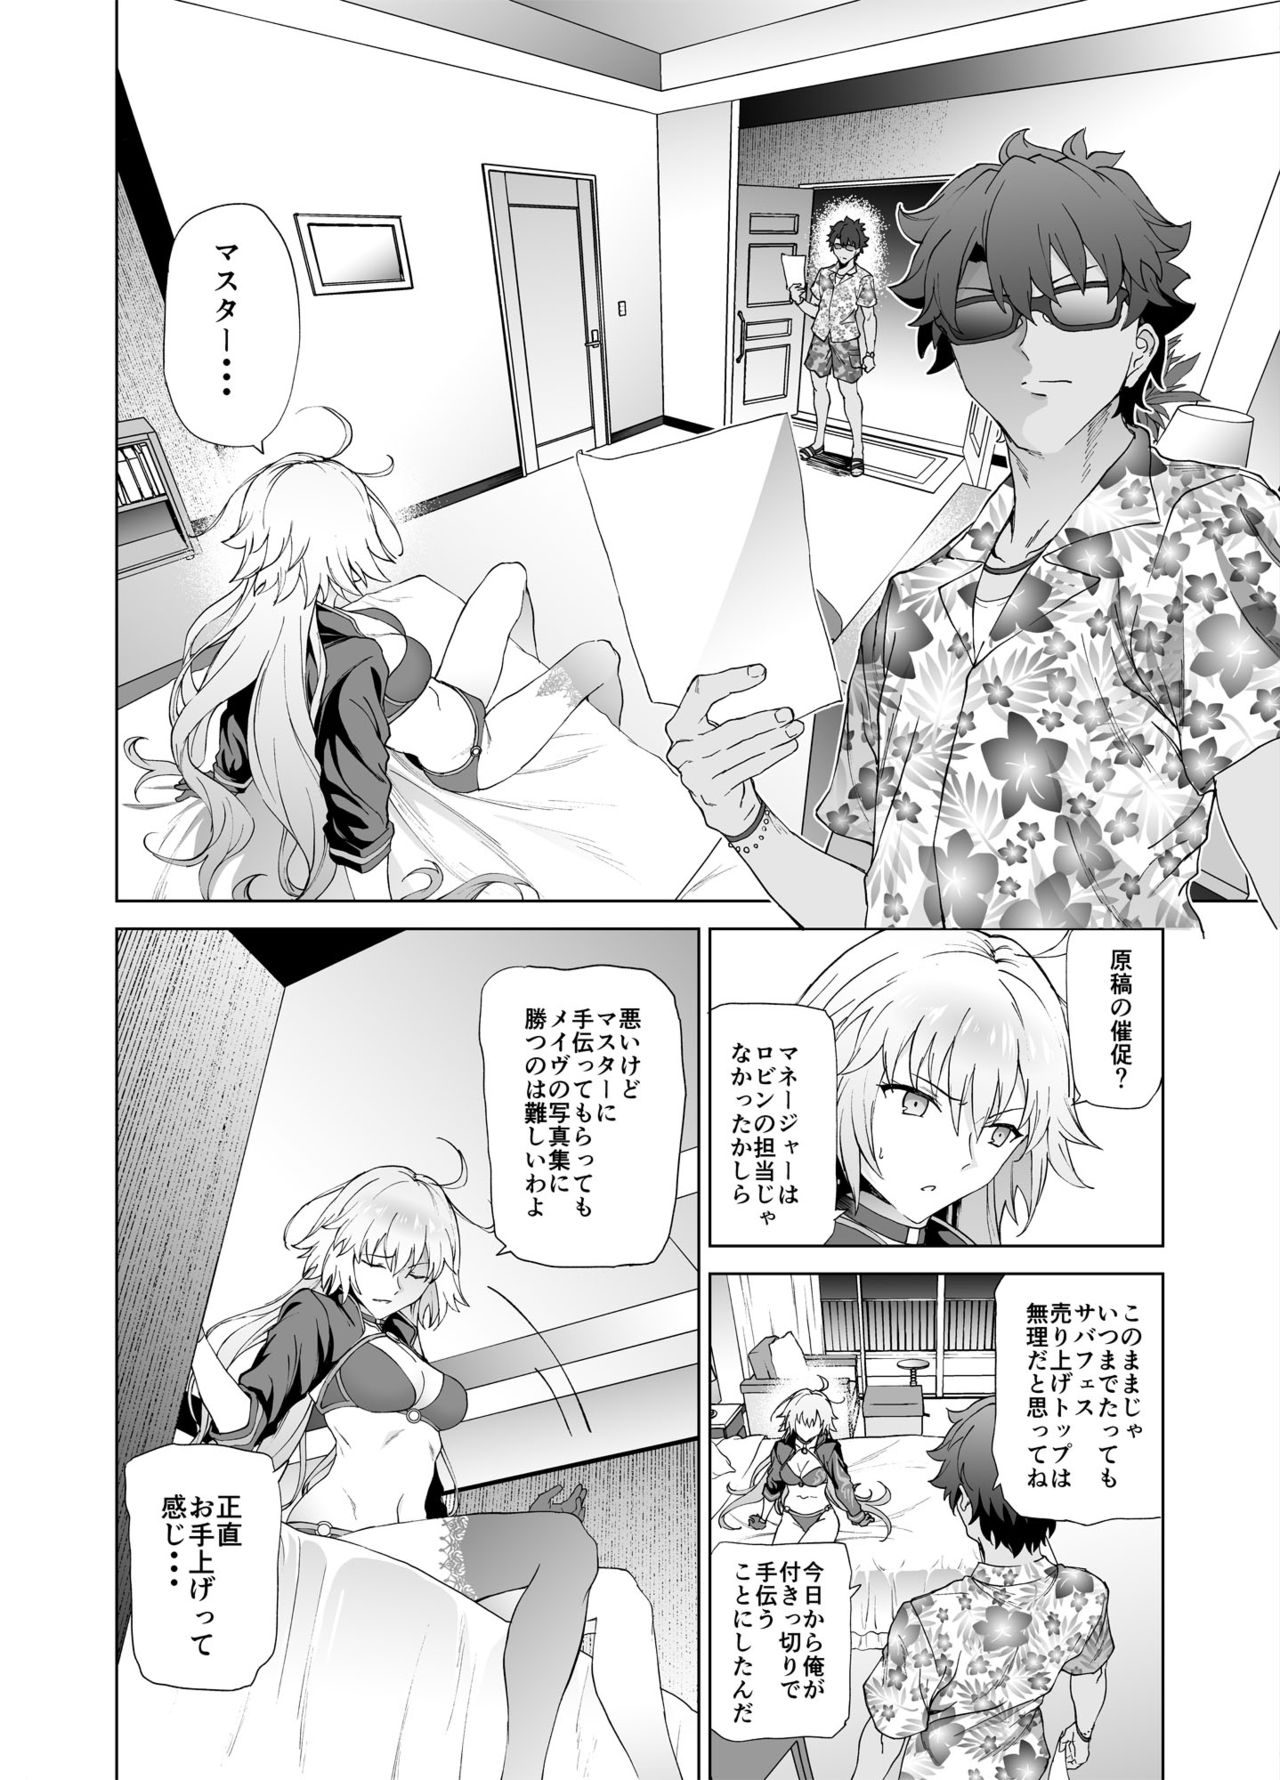 [EXTENDED PART (Endo Yoshiki)] Jeanne W (Fate/Grand Order) [Digital] page 3 full